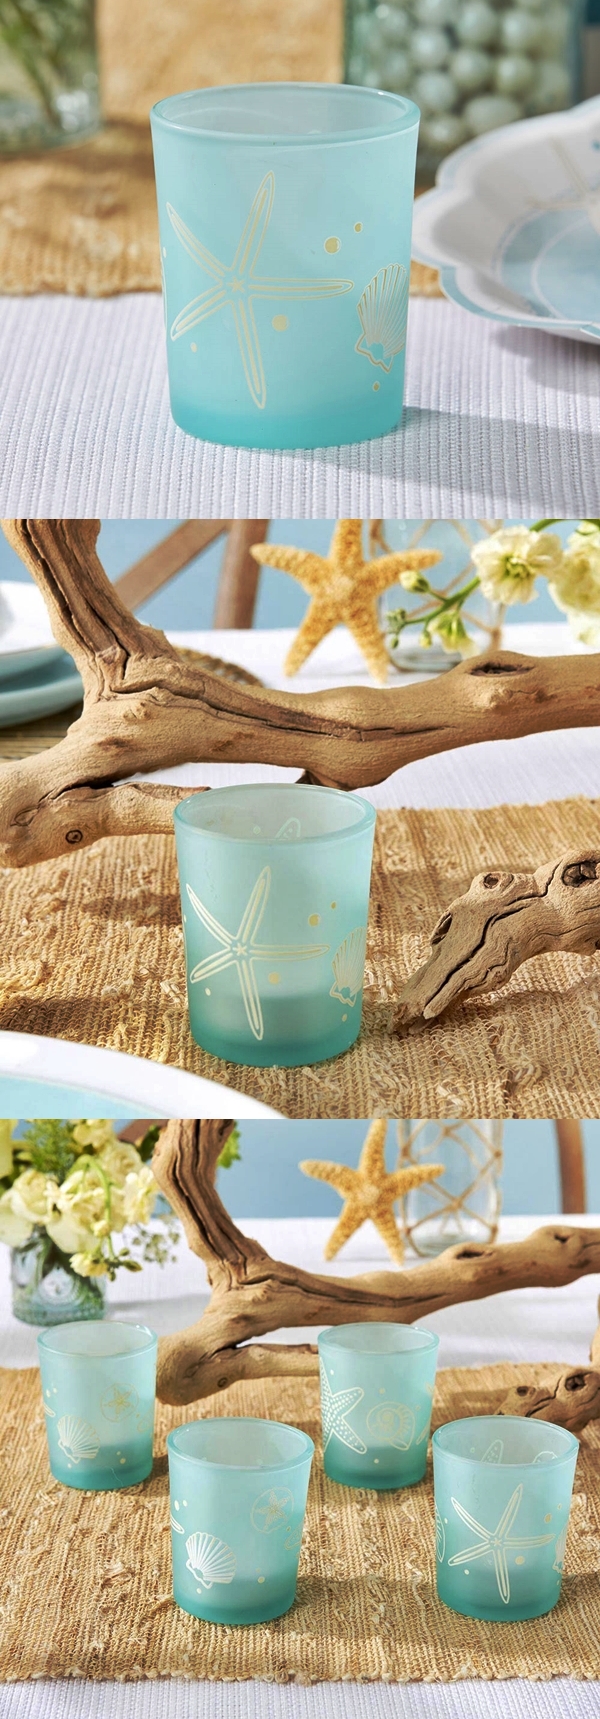 Kate Aspen Beach Party Designs Frosted Glass Votives (Set of 4)